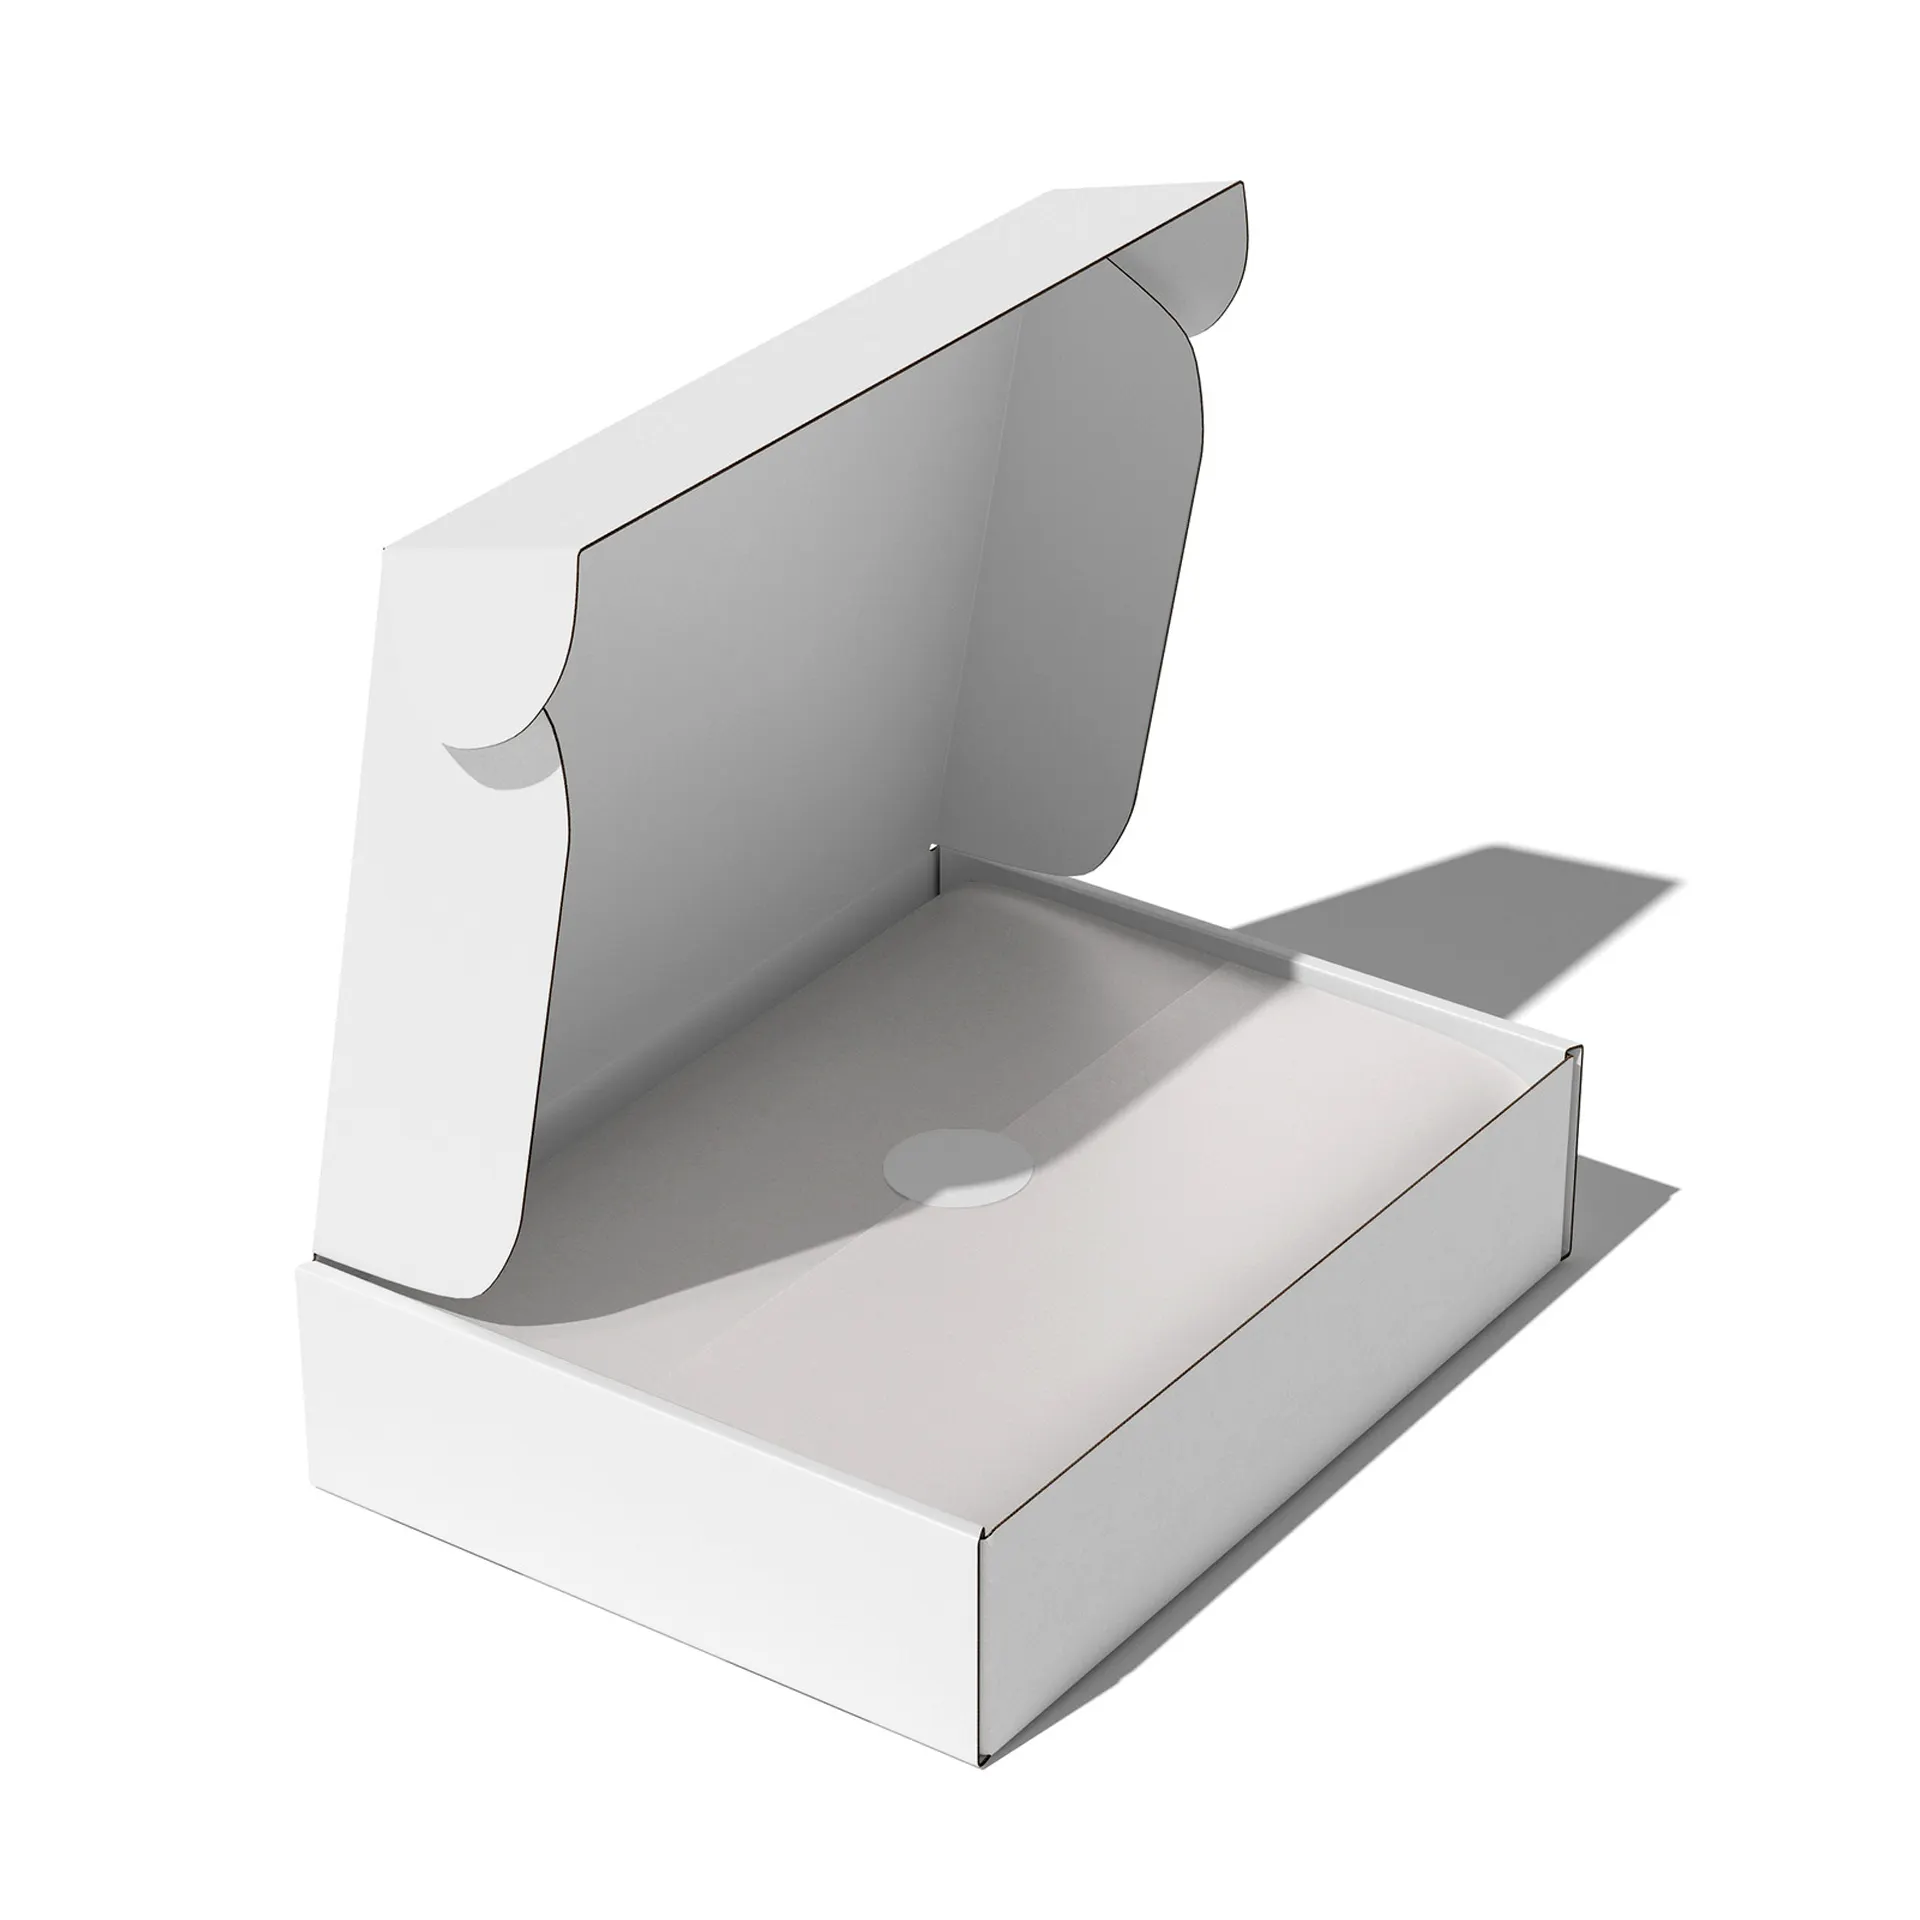 Factory White Eco Friendly Costume Mailer Box 6x8x1shipping Cardboard Paper Gloss Coated Mailer Box Plane Corrugated Postal Box